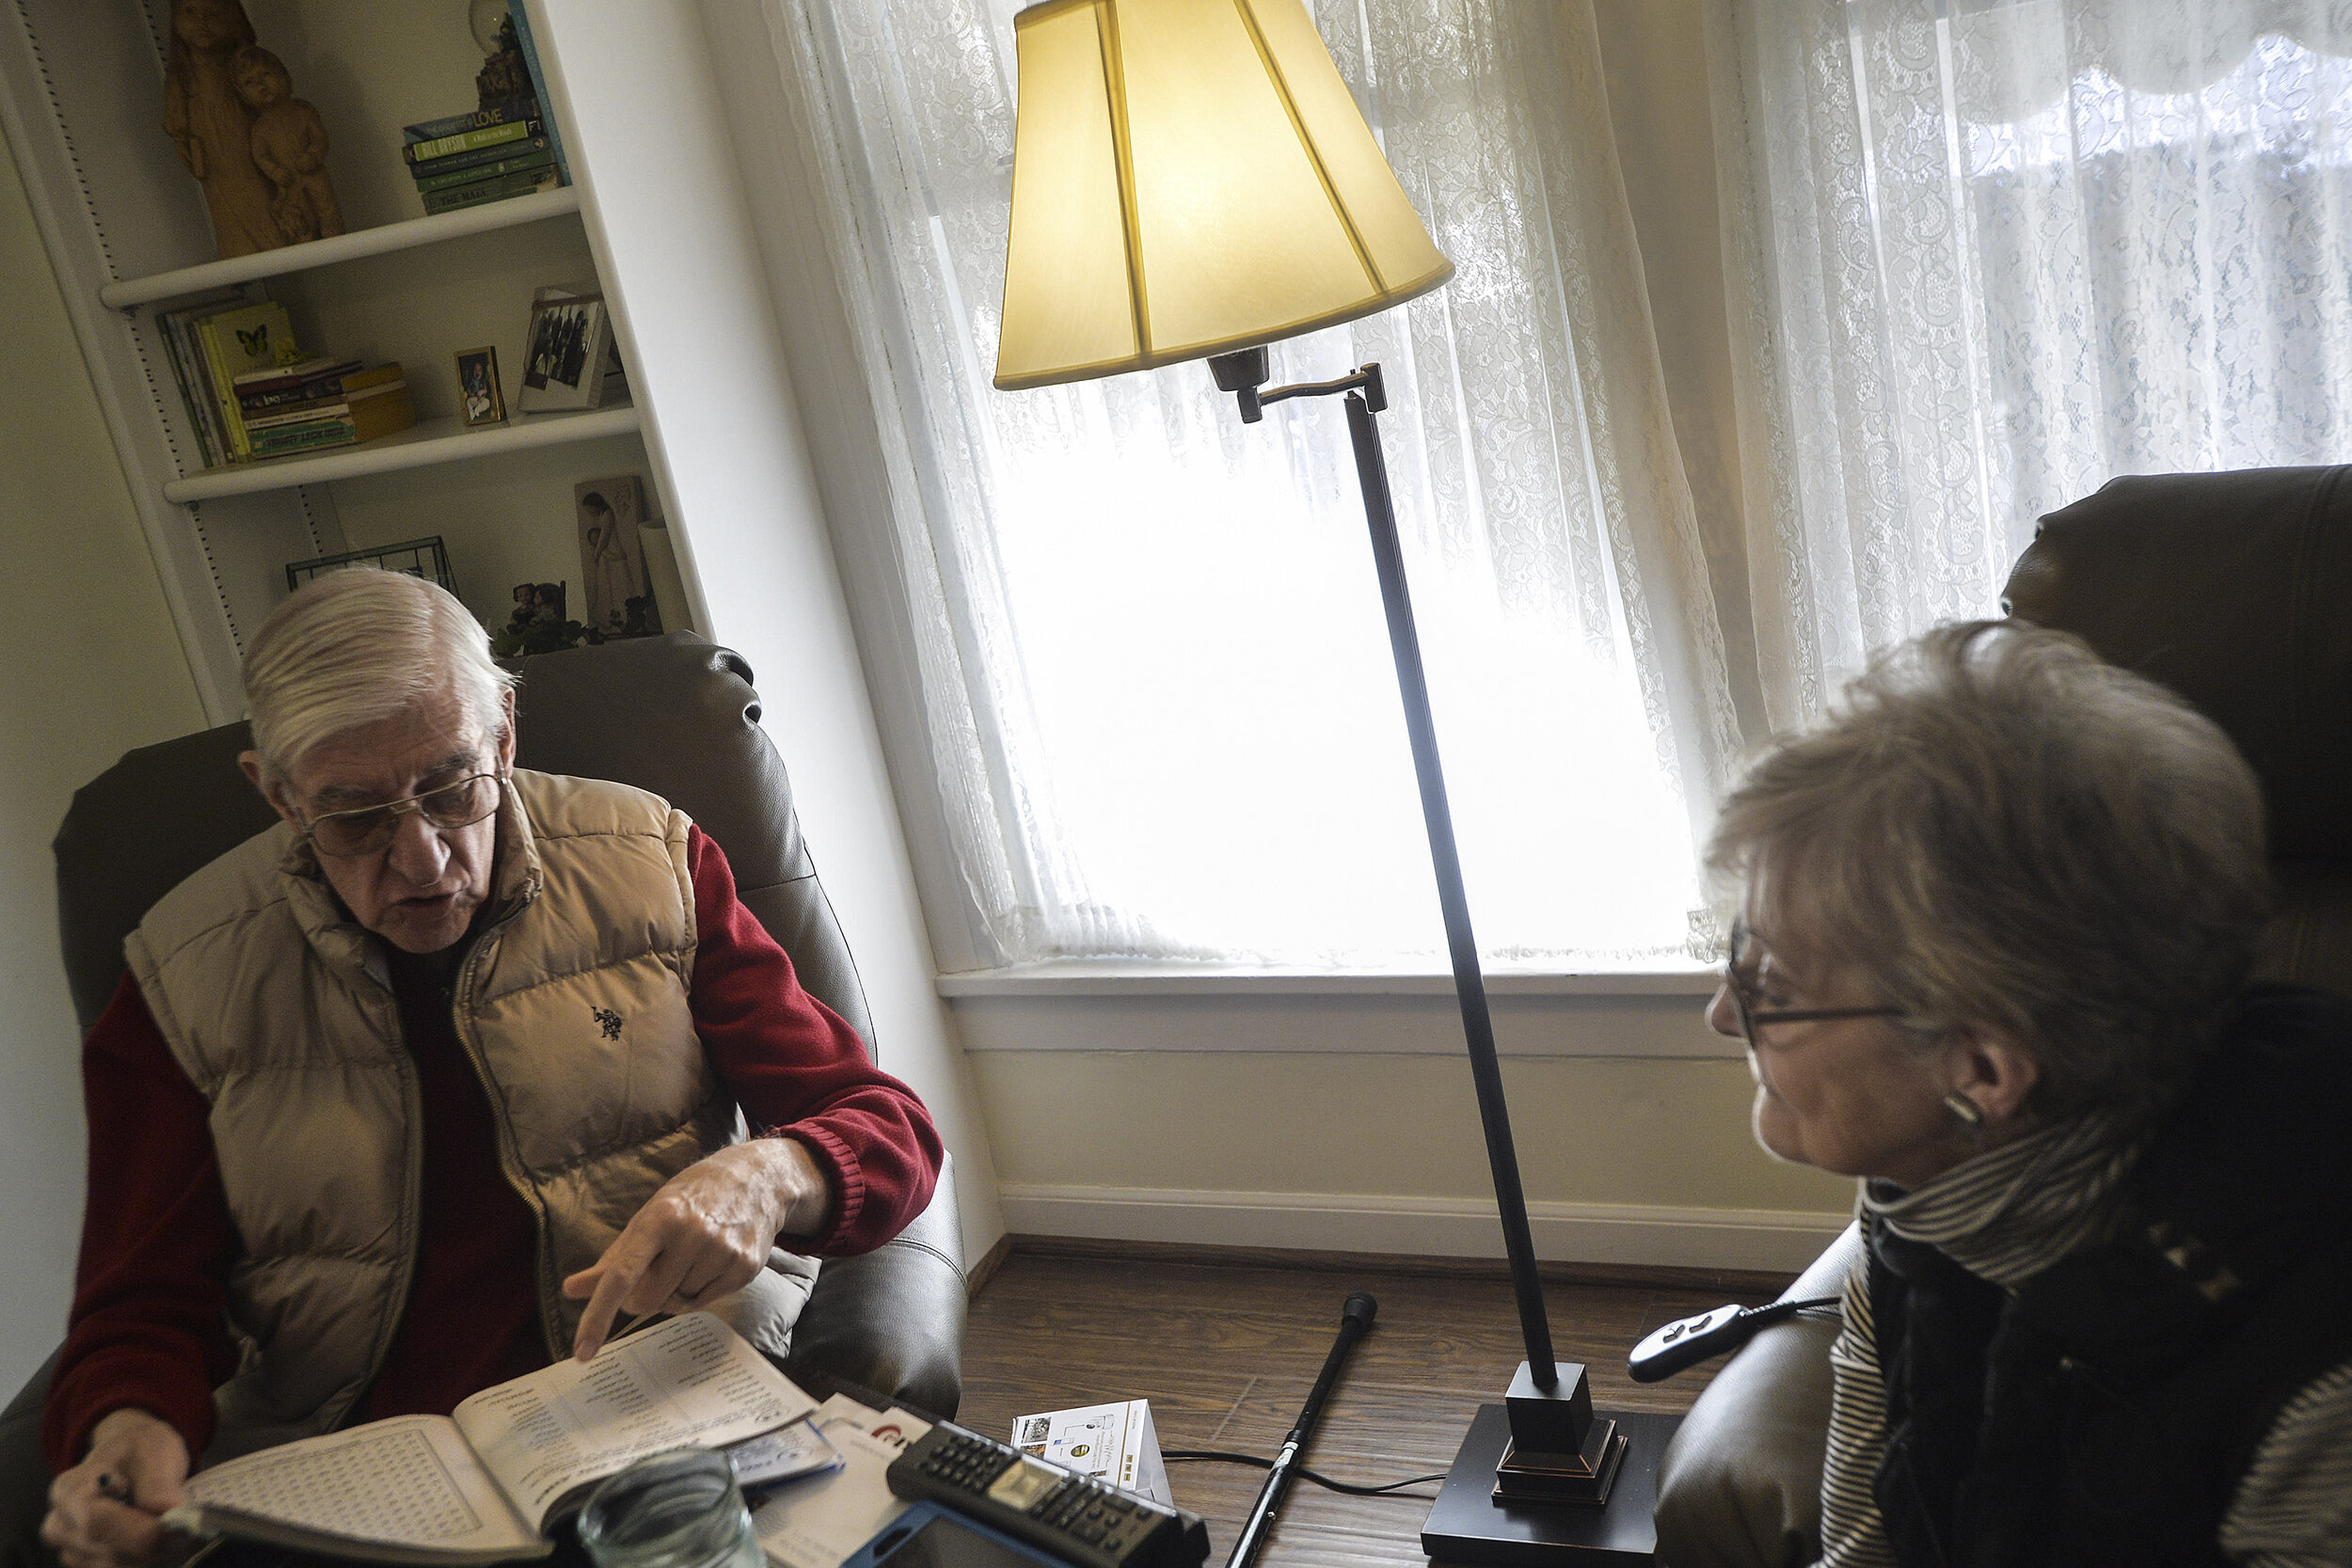  Rich Buchanan works a word search as his wife, Judy, observes on Friday, Feb. 2, 2018, at their home in Bloomington, Illinois. “They are kind of fun,” Rich said of word searches. “But after 30 to 45 minutes of that, I’m exhausted.” 